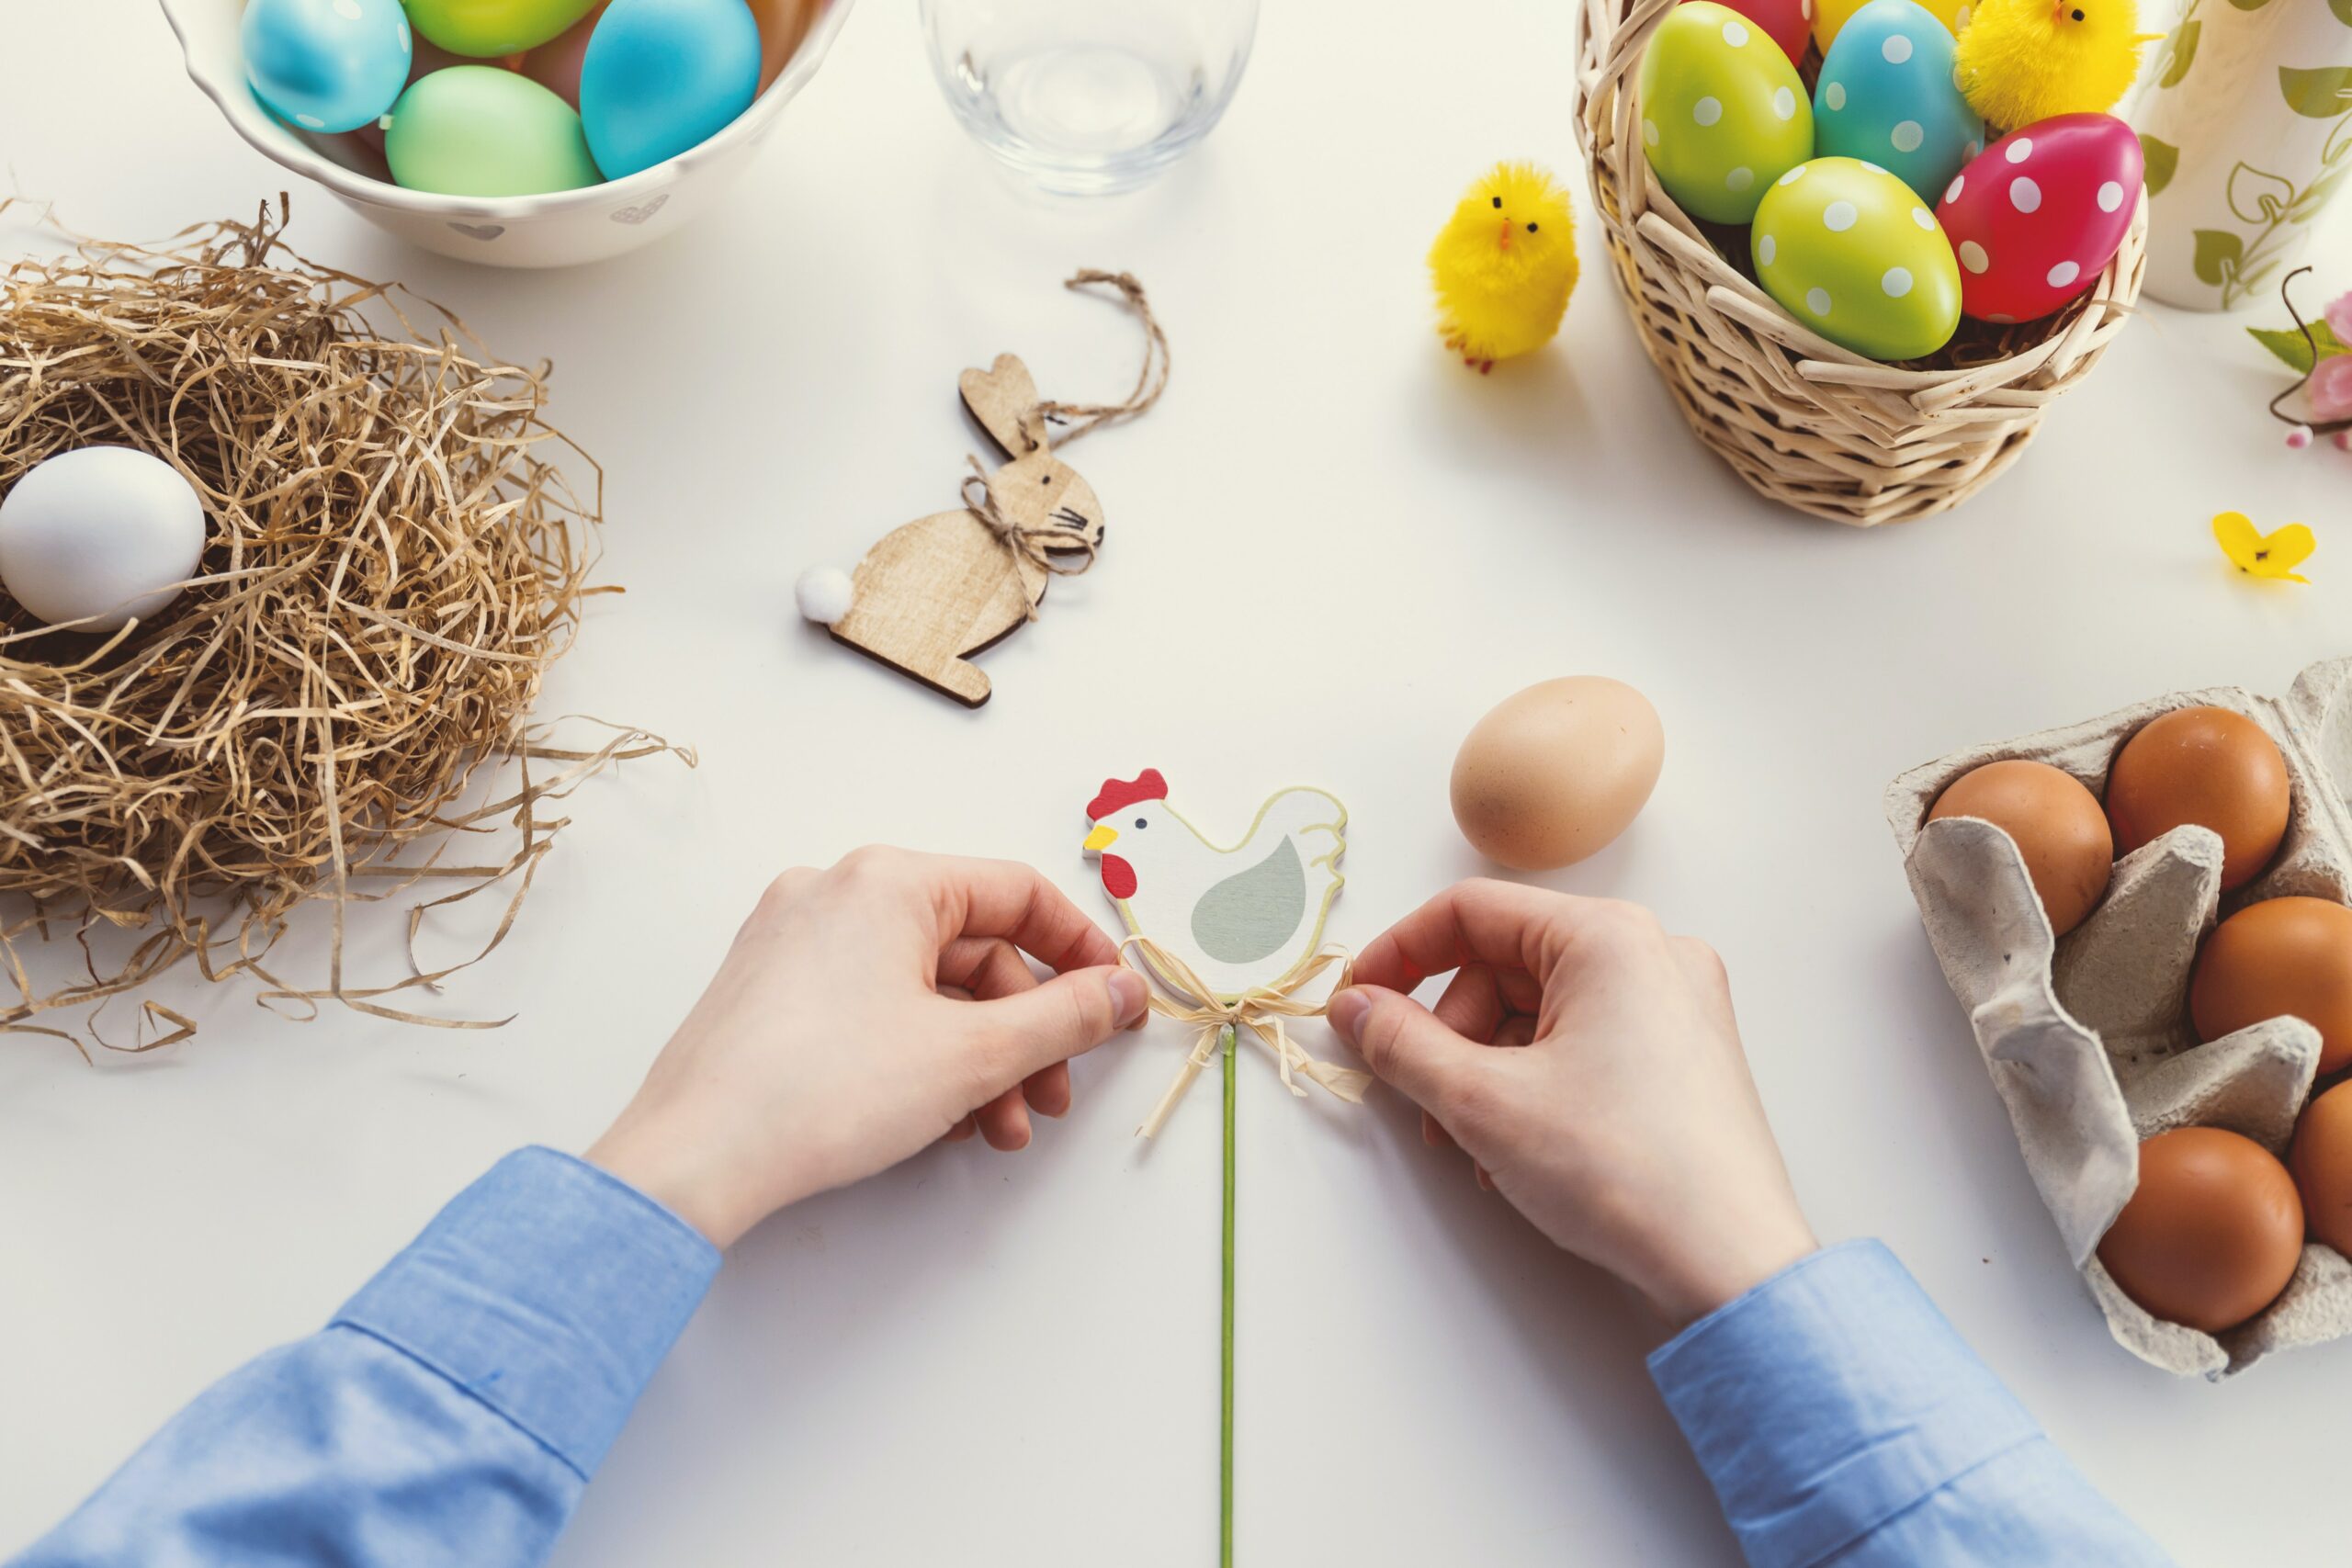 Egg-cellent Easter Marketing Ideas To Boost Your Campaign